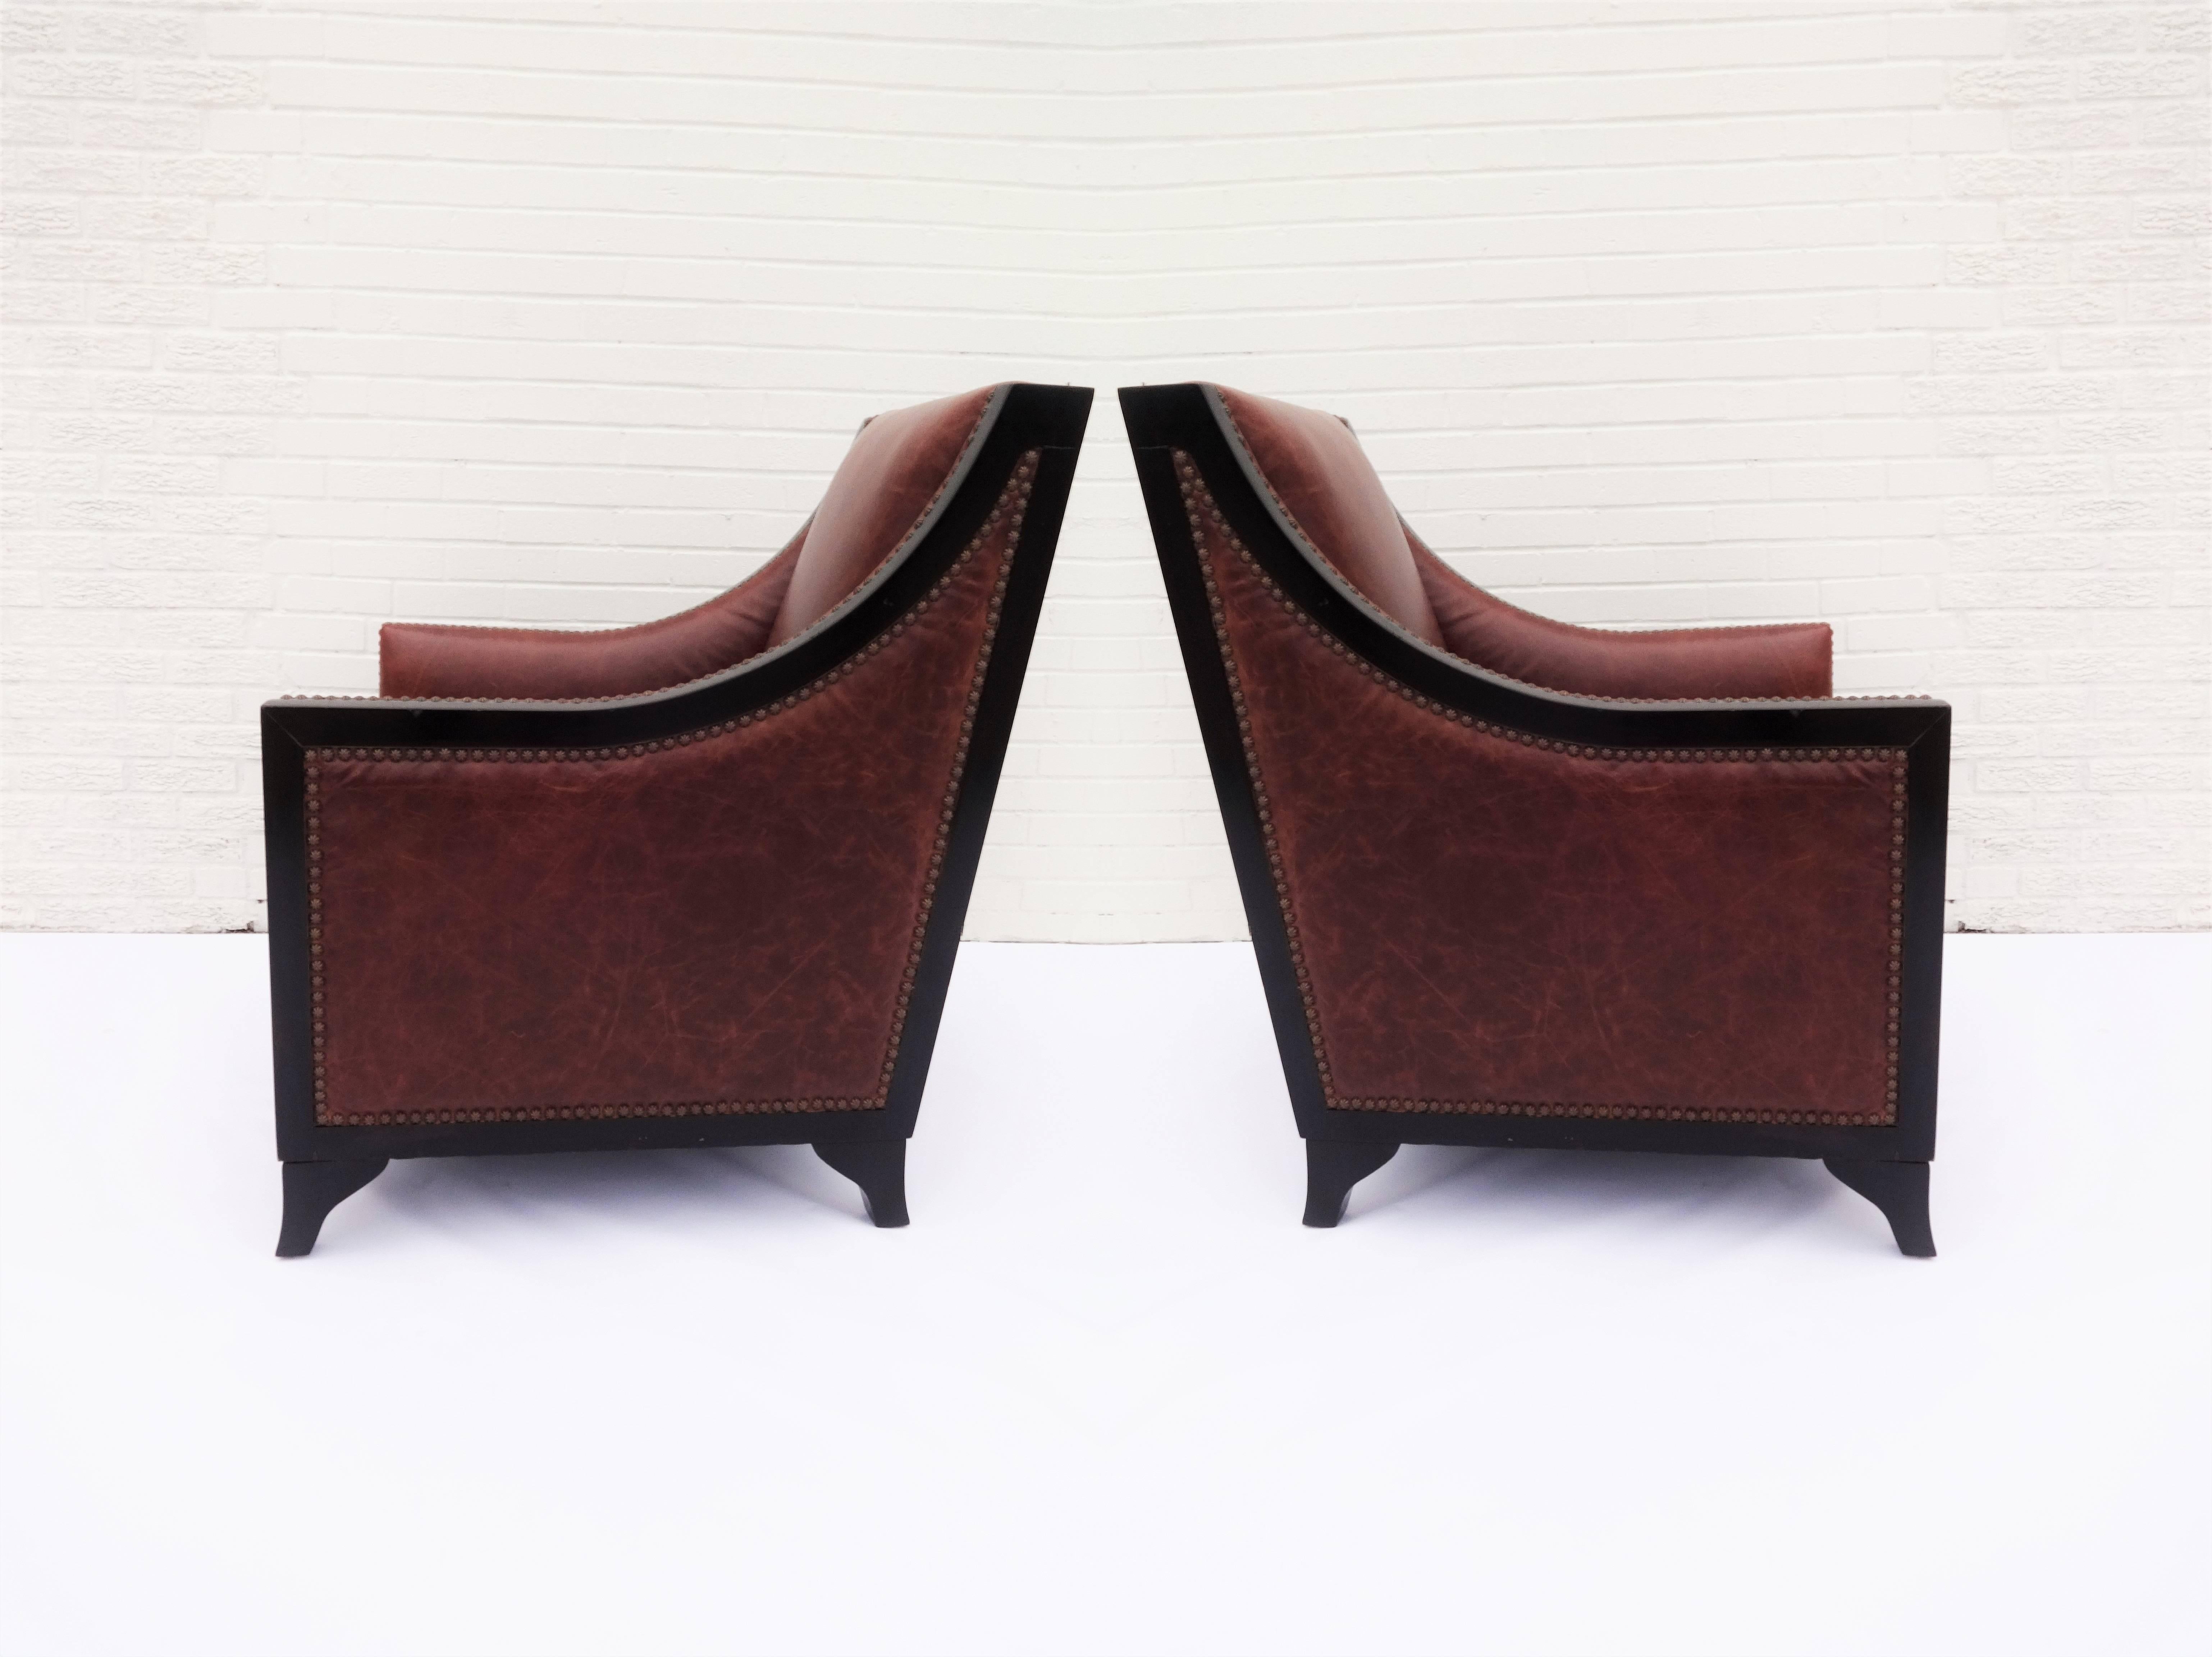 Pair of French Art Deco club chairs in rich cognac colored leather. Nice patina, all the hallmarks of natural leather including scars, stretch marks, grain and texture variations. This chair is finished with studding which is achieved with close